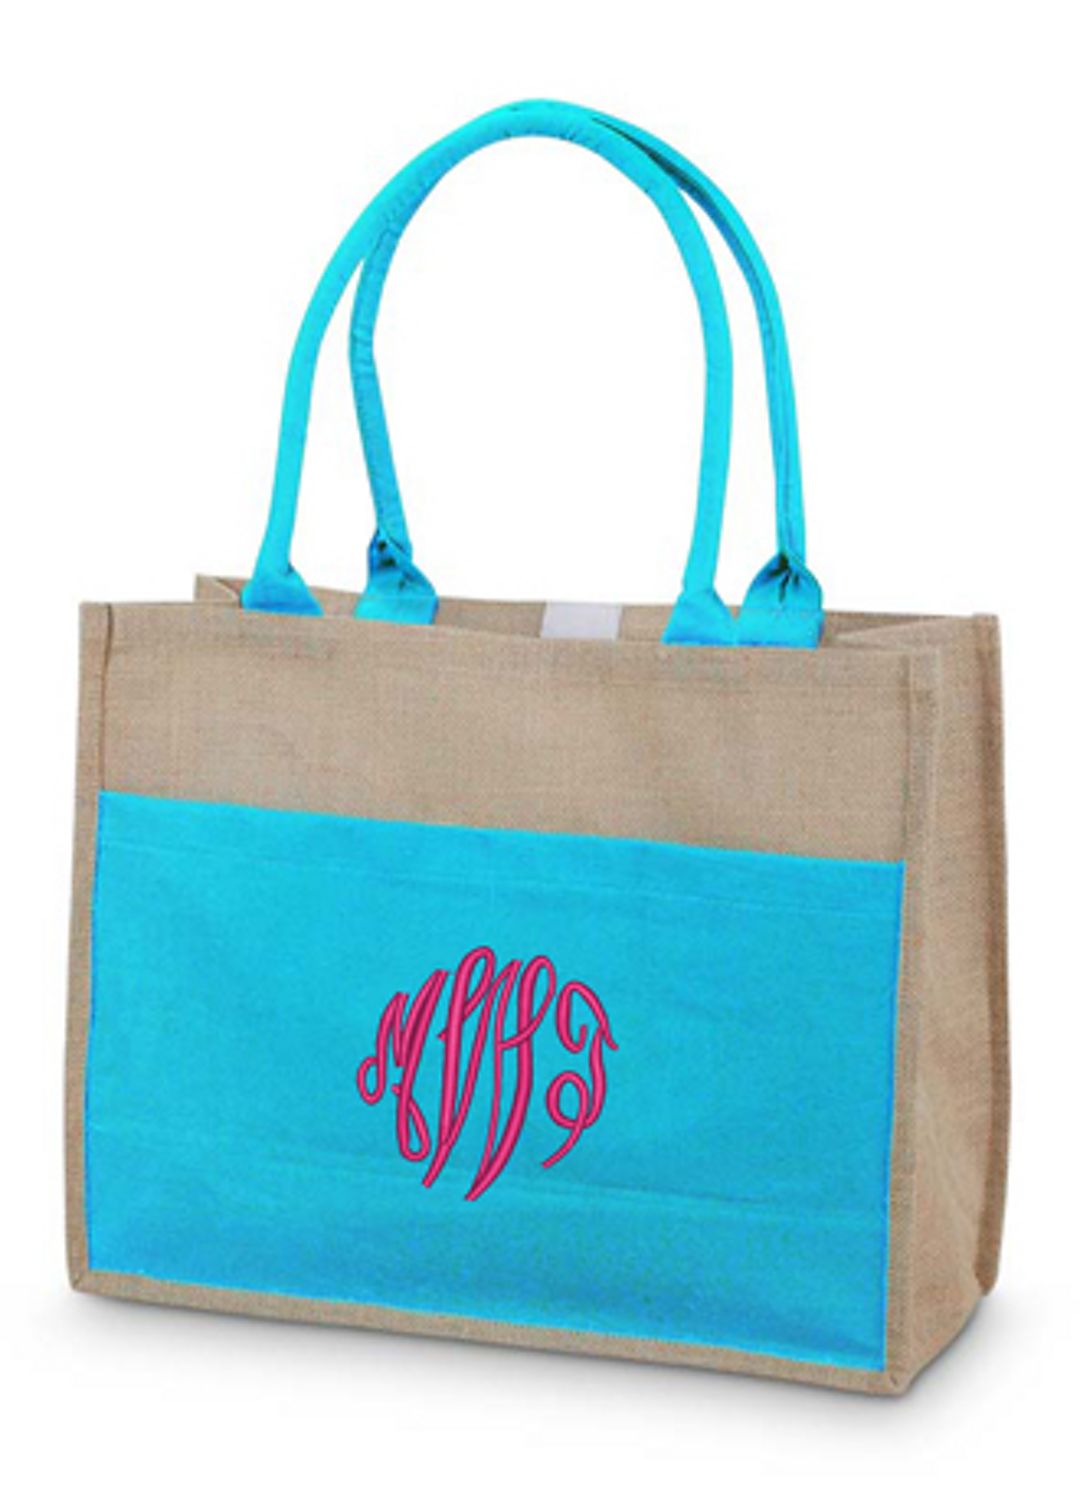 DB Exc Personalized Jute Tote with Canvas Pocket Image 1